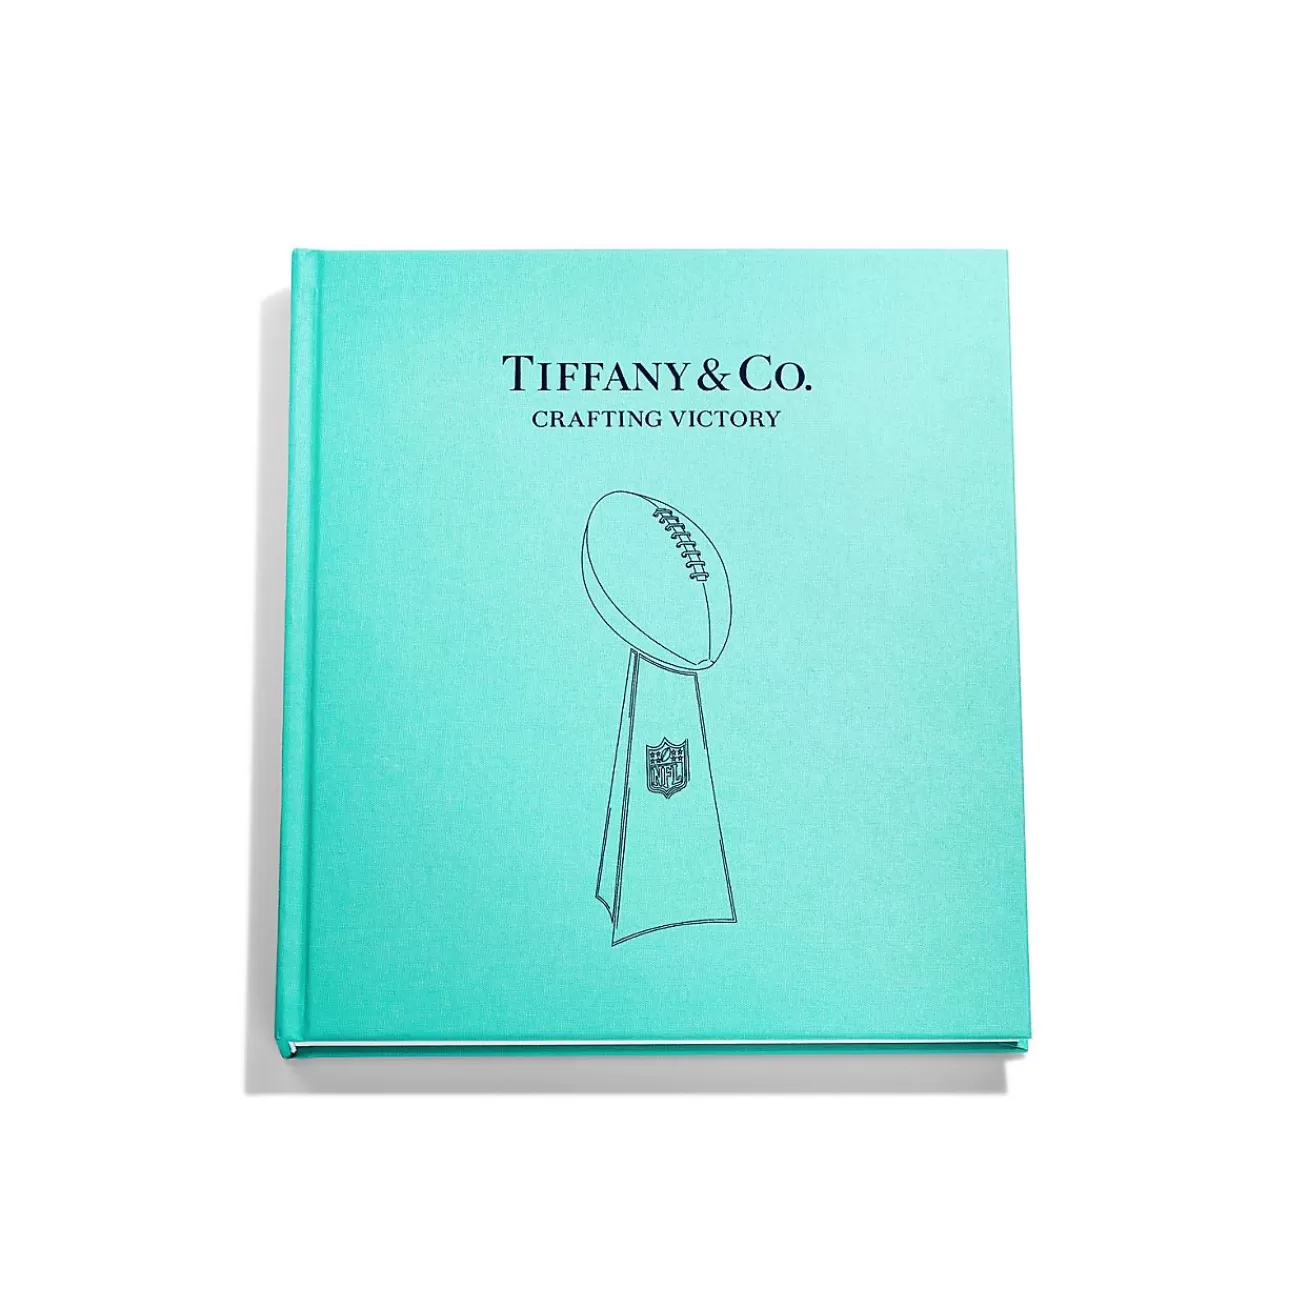 Tiffany & Co. Assouline "Crafting Victory" at Book | ^ Tiffany Blue® Gifts | Decor